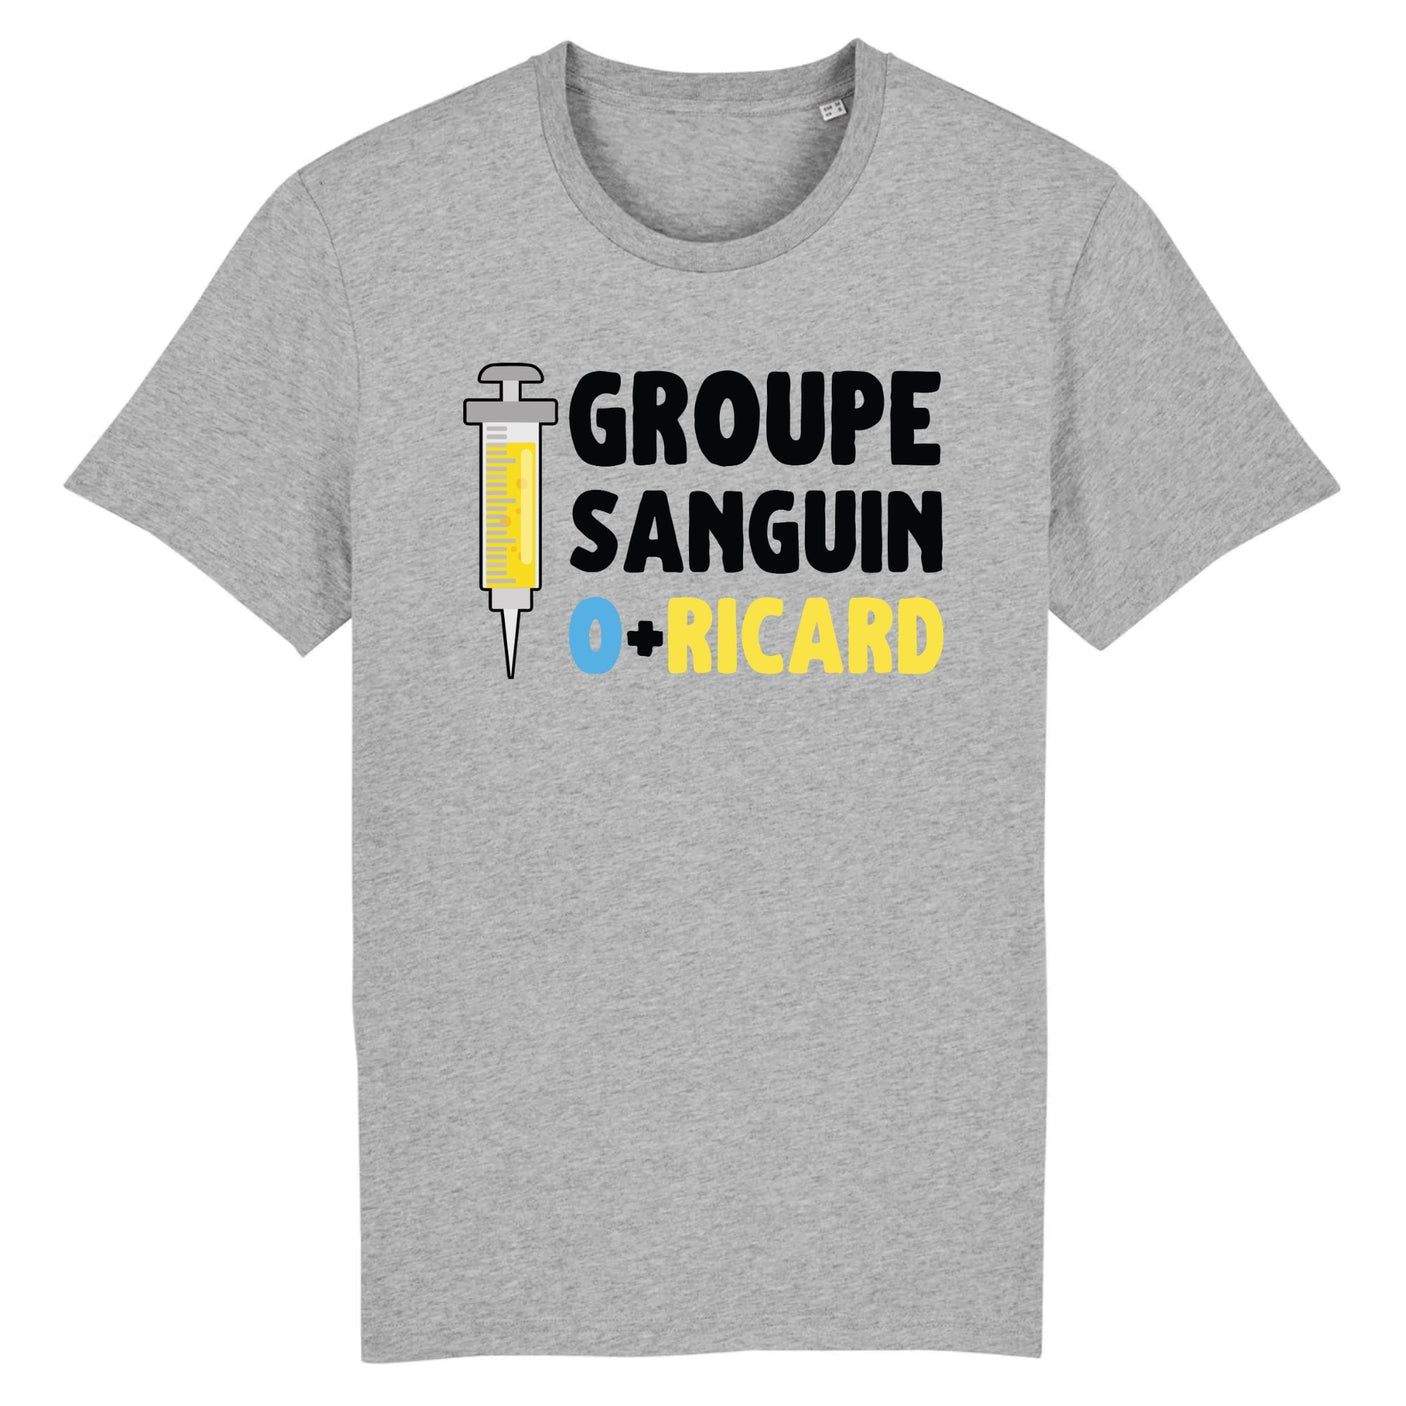 T-Shirt Homme Groupe sanguin O + Ricard 